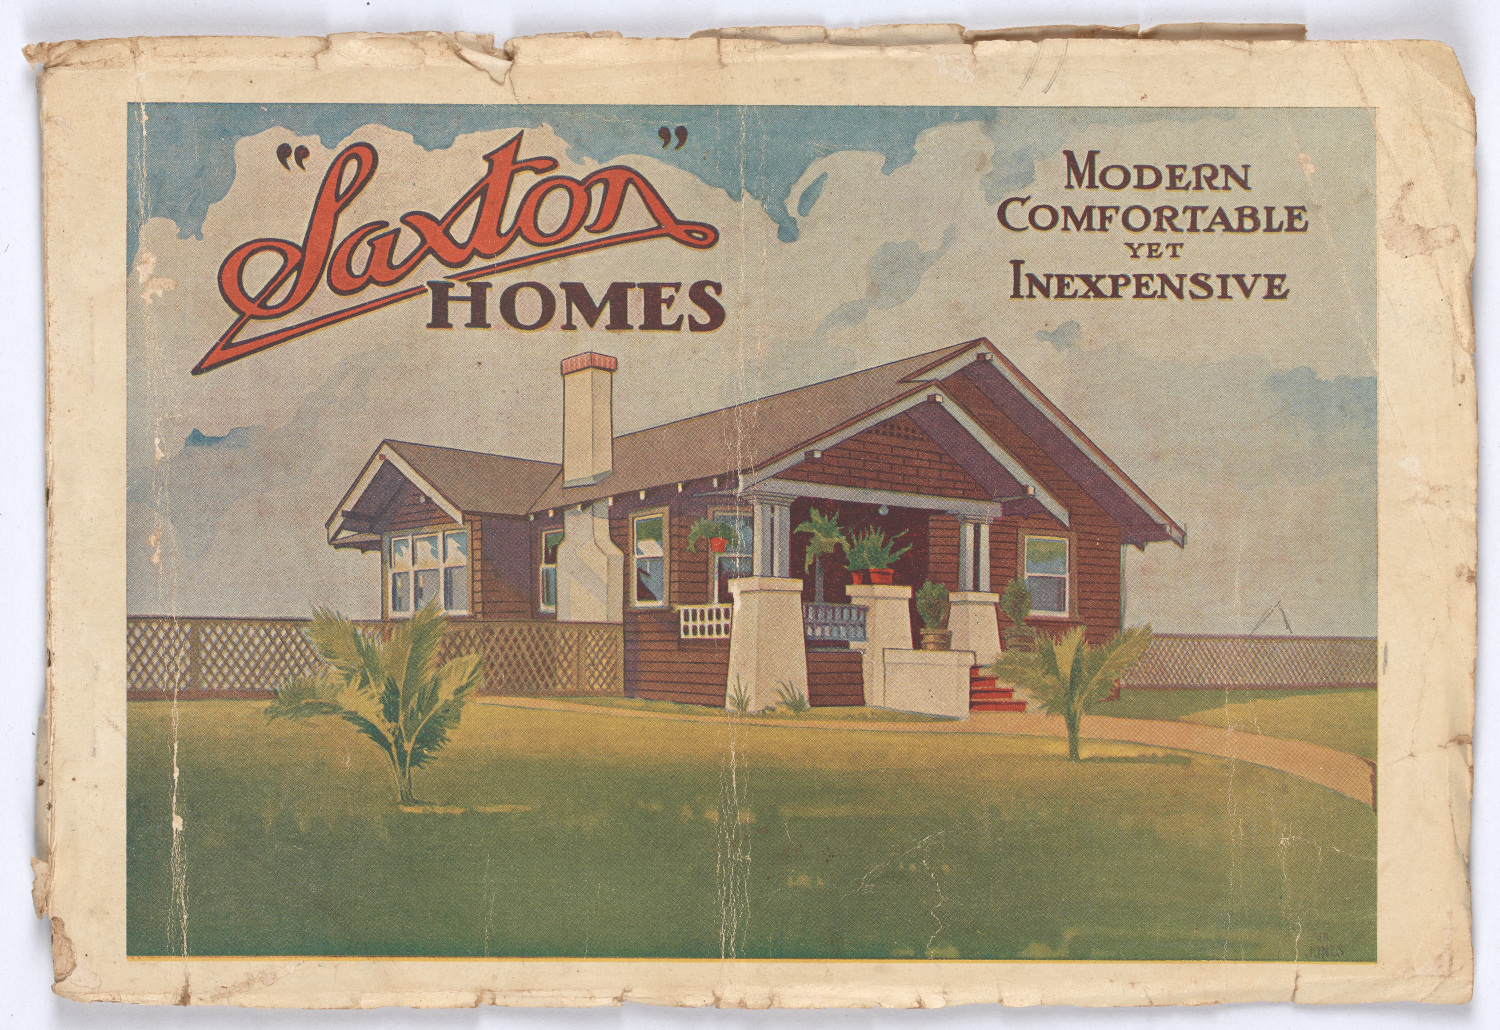 Image of house on front cover of Saxton Homes trade catalogue.